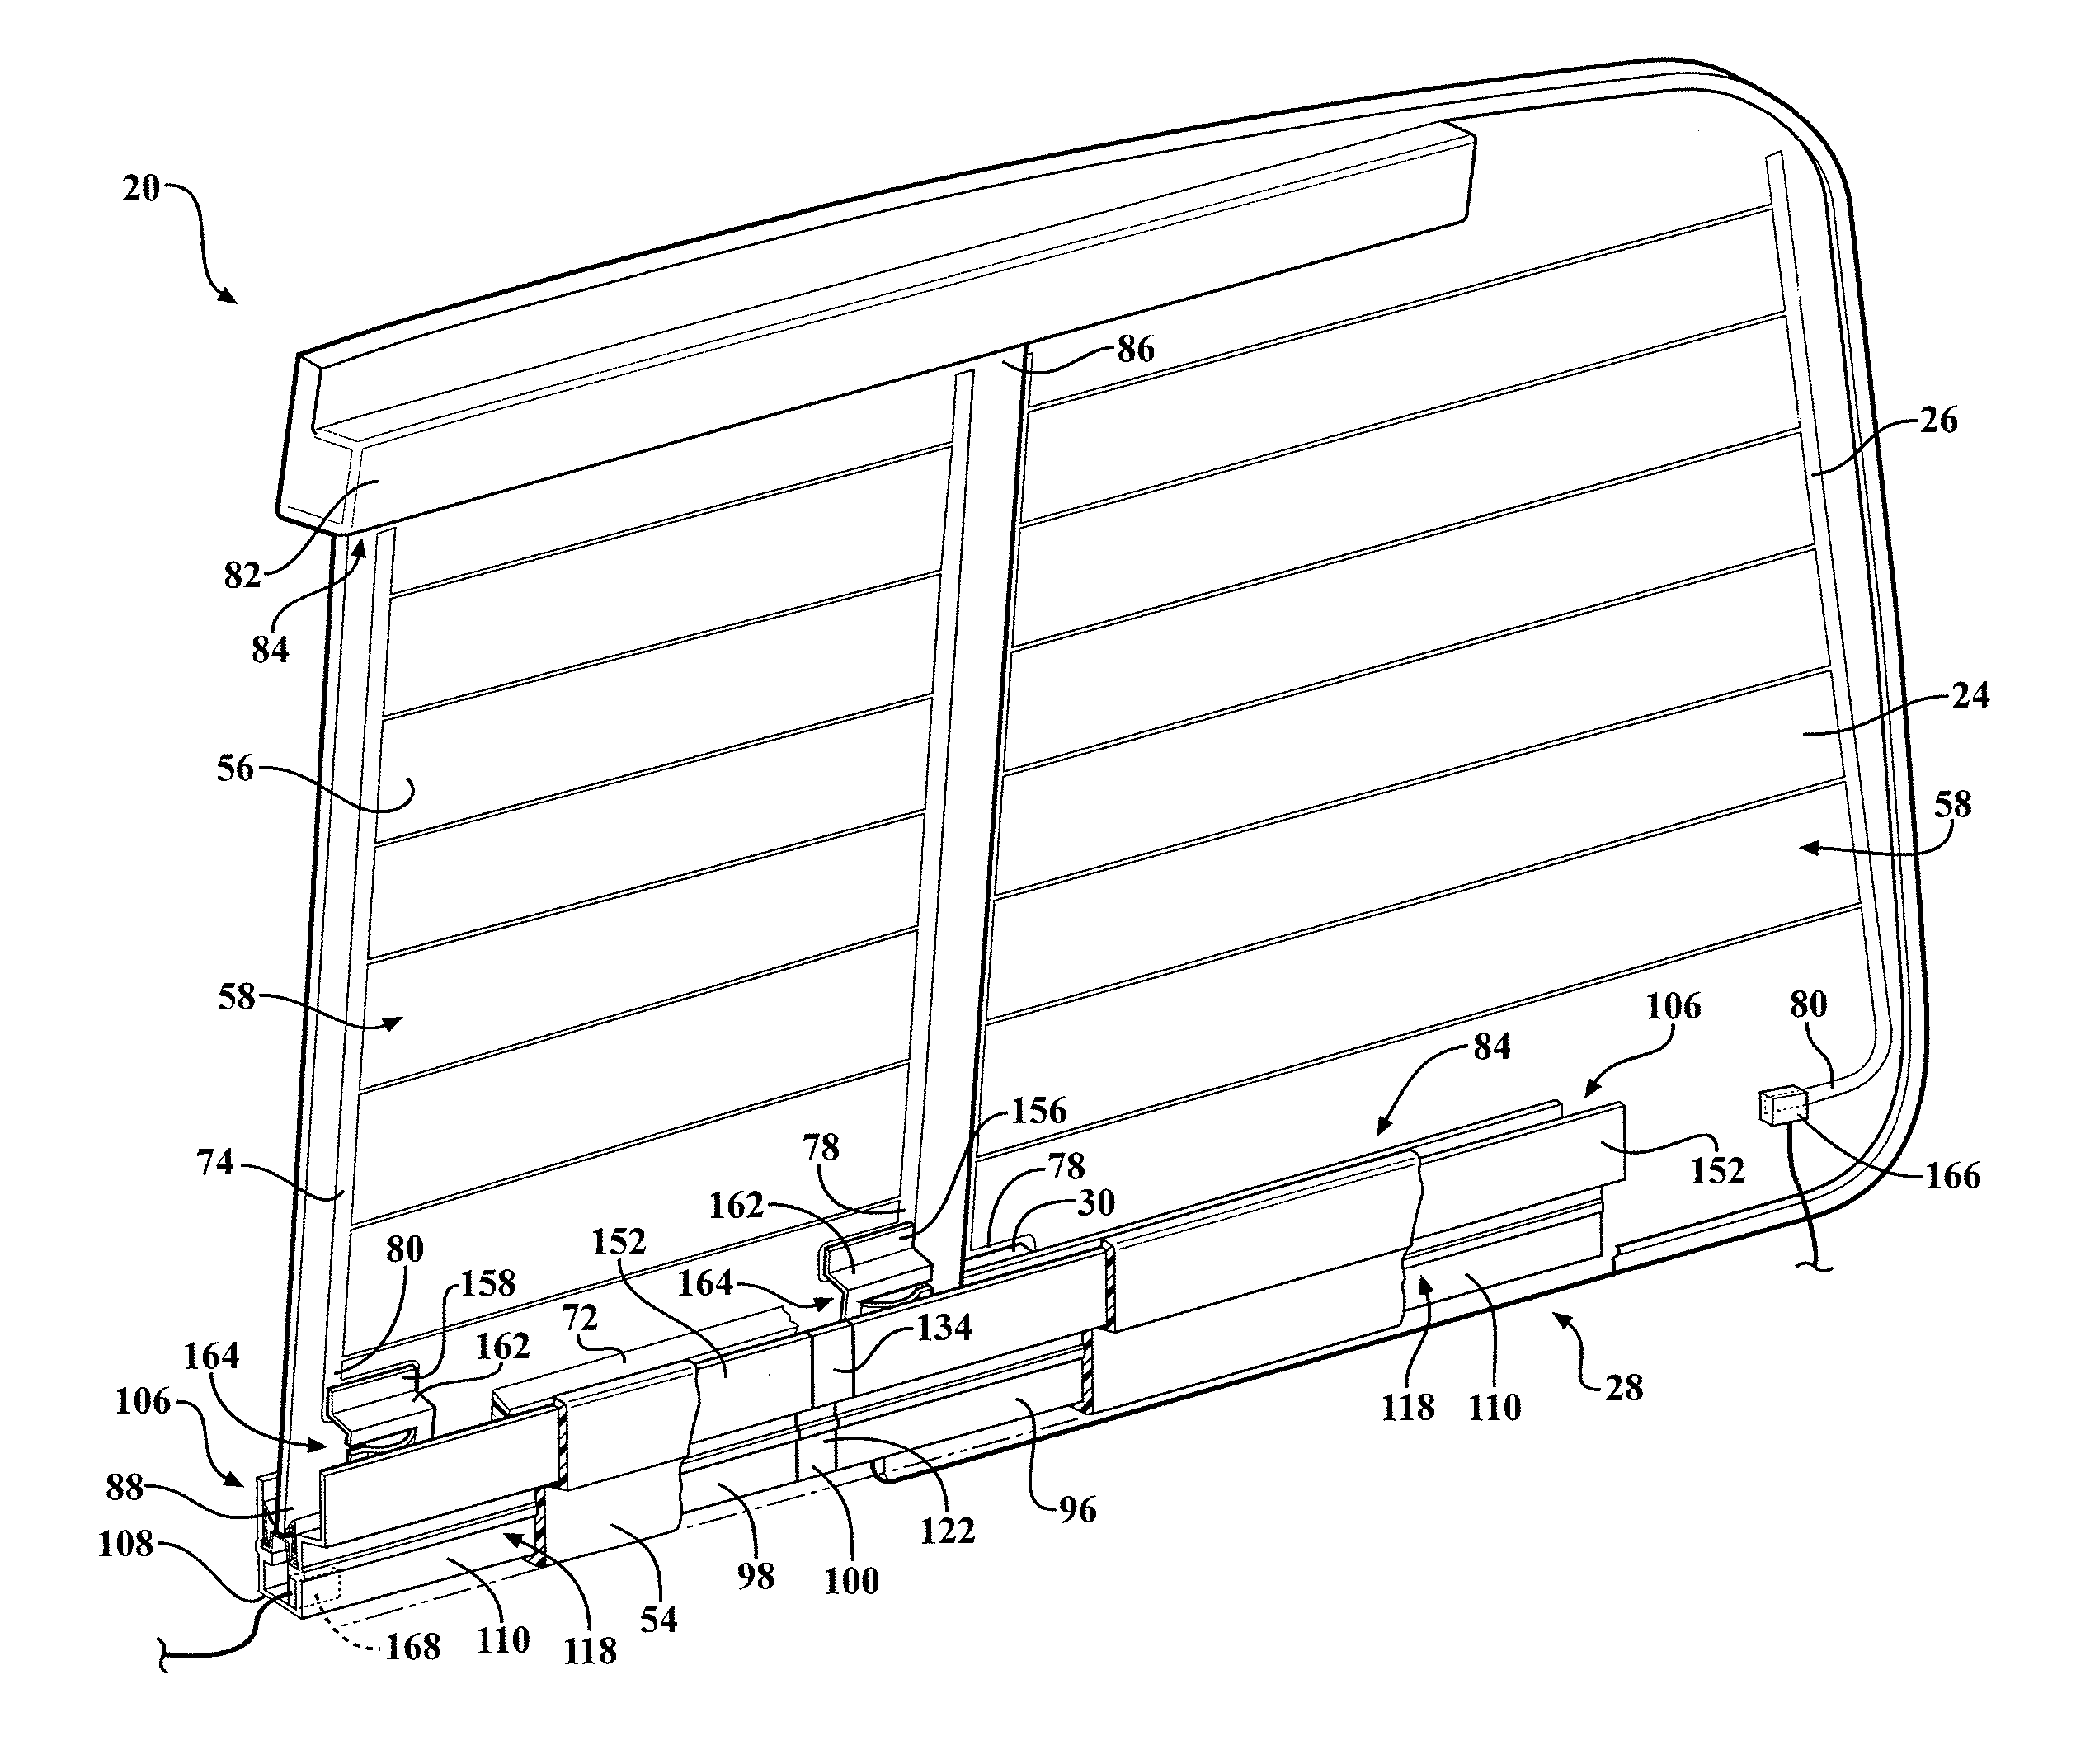 Sliding window assembly for a vehicle